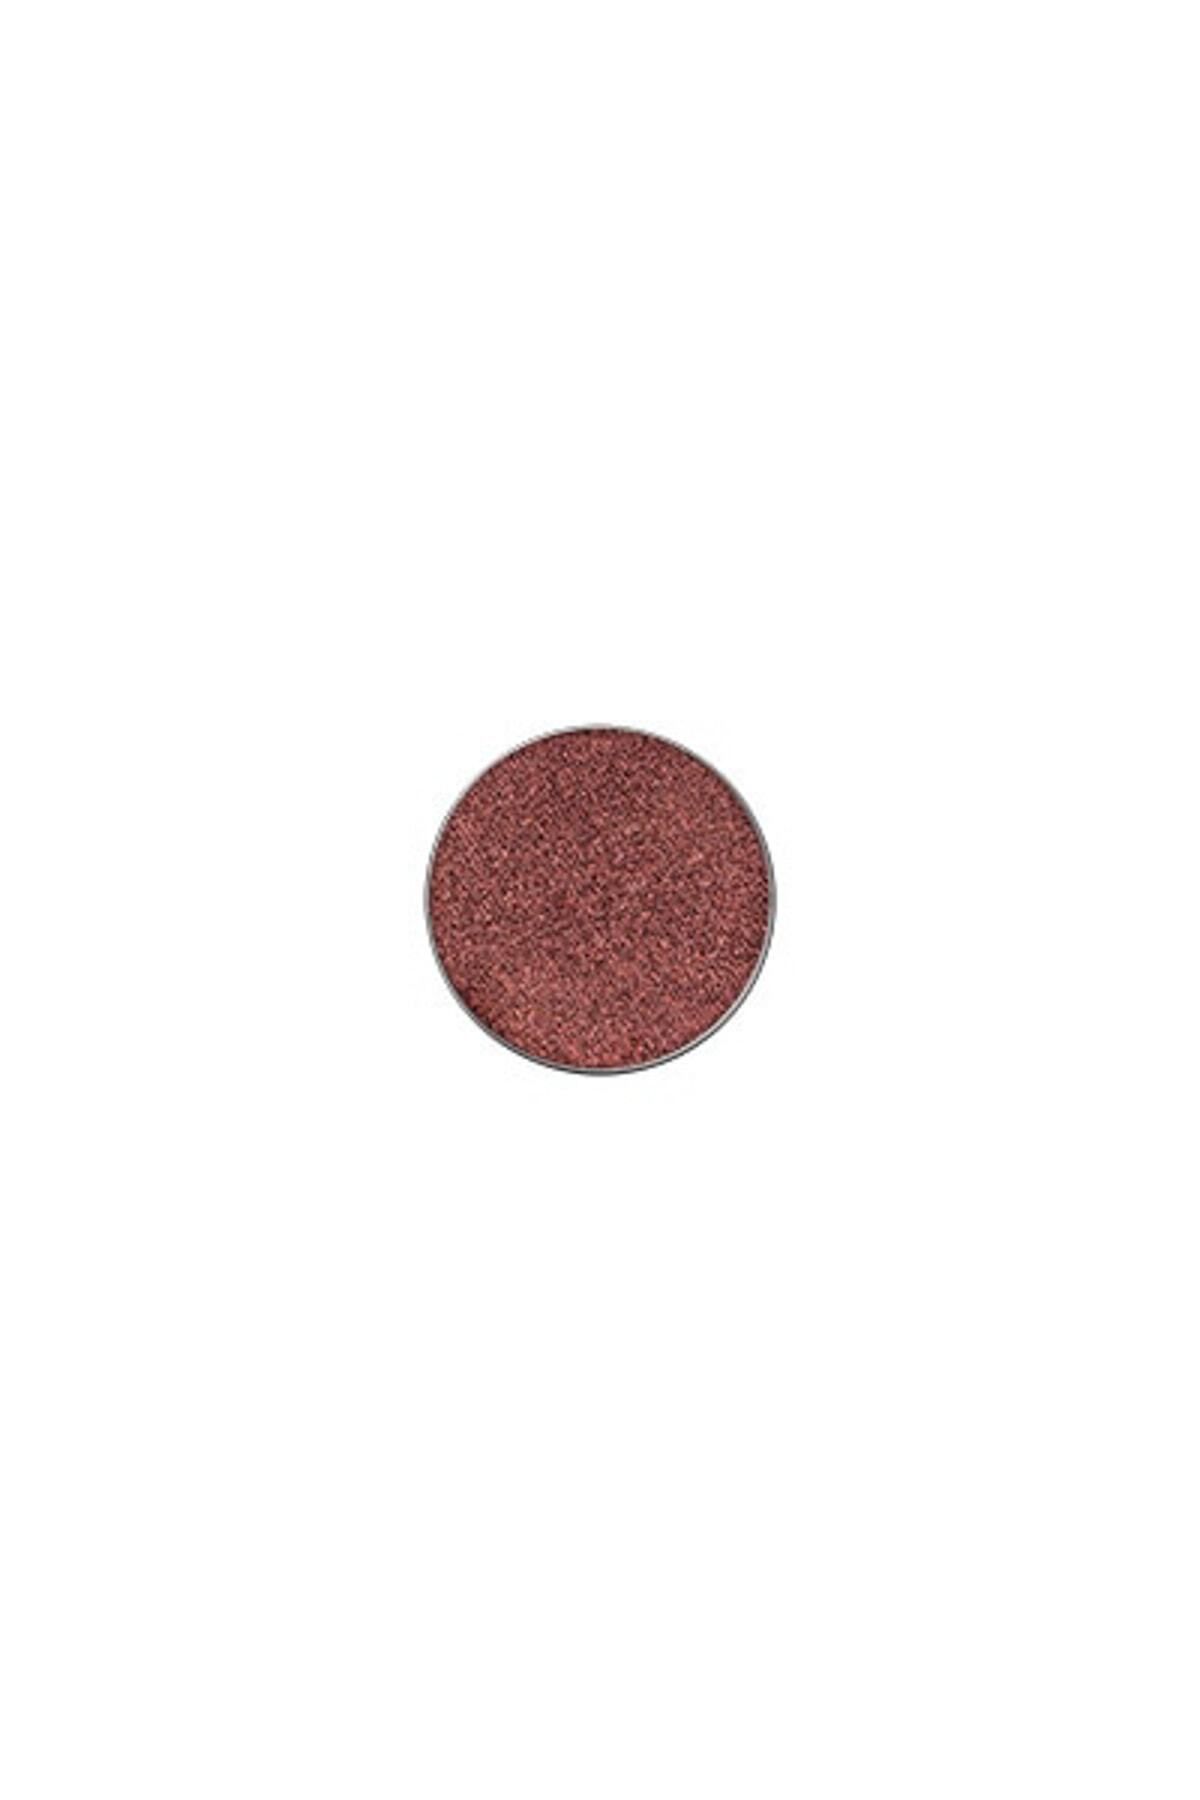 Mac Mac - Dazzleshadow Extreme Pro Palette Refill Pan Incinerated Refill Far 1.5 g